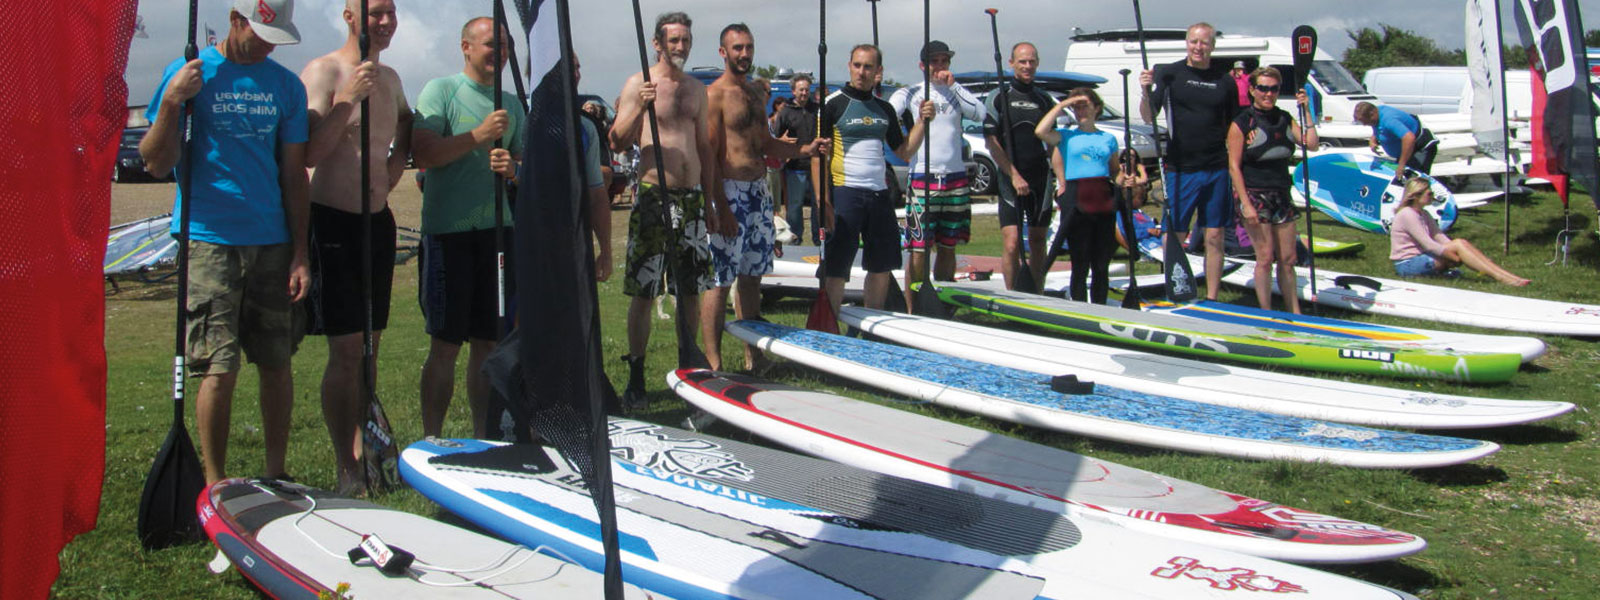 paddleboarding – sup courses